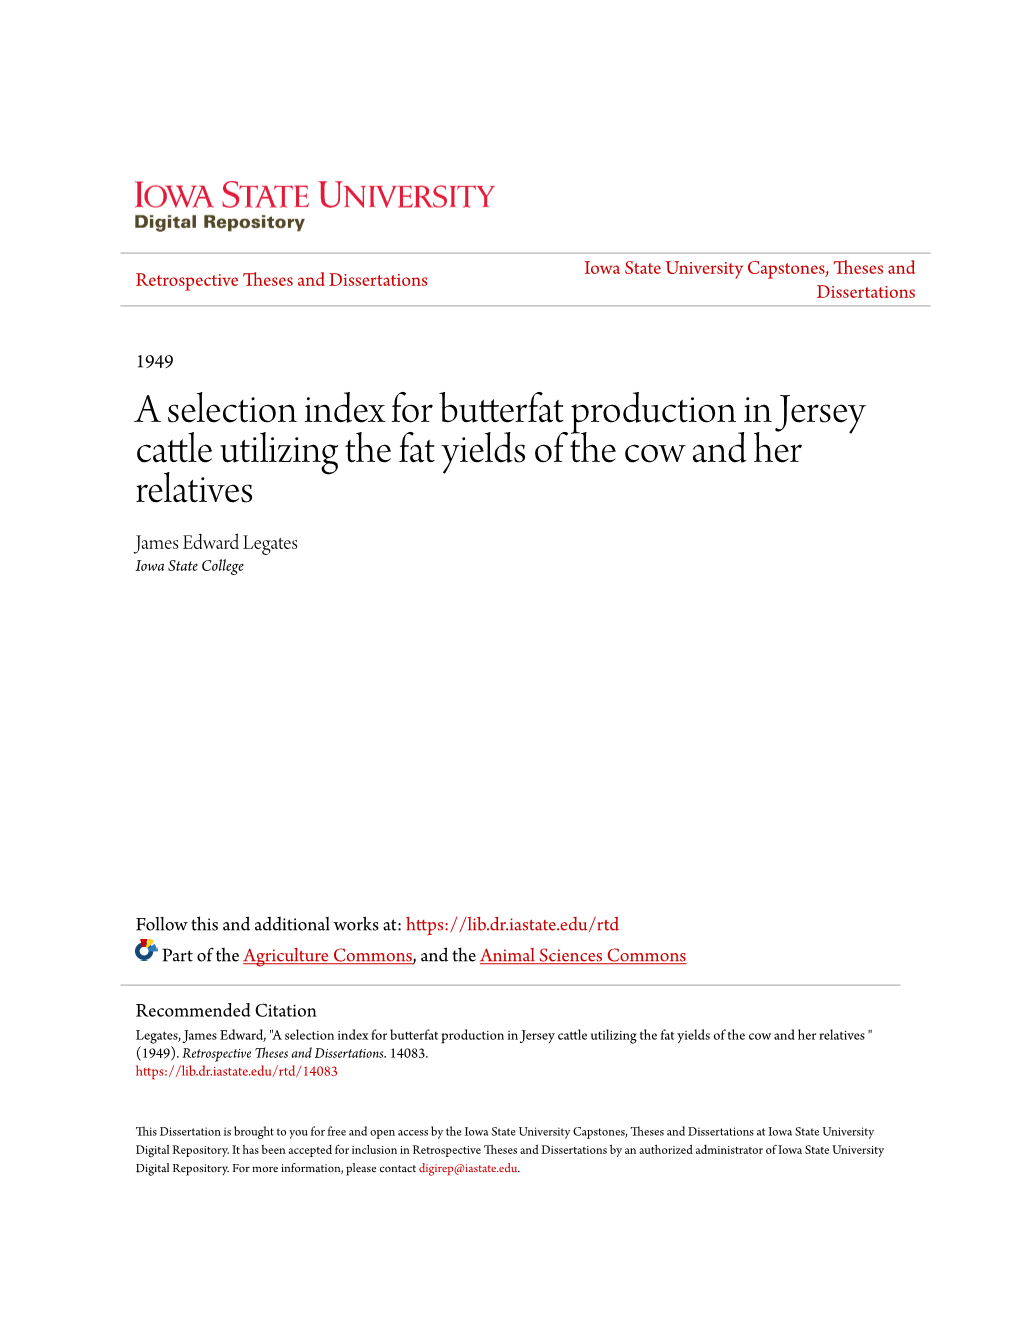 A Selection Index for Butterfat Production in Jersey Cattle Utilizing the Fat Yields of the Cow and Her Relatives James Edward Legates Iowa State College